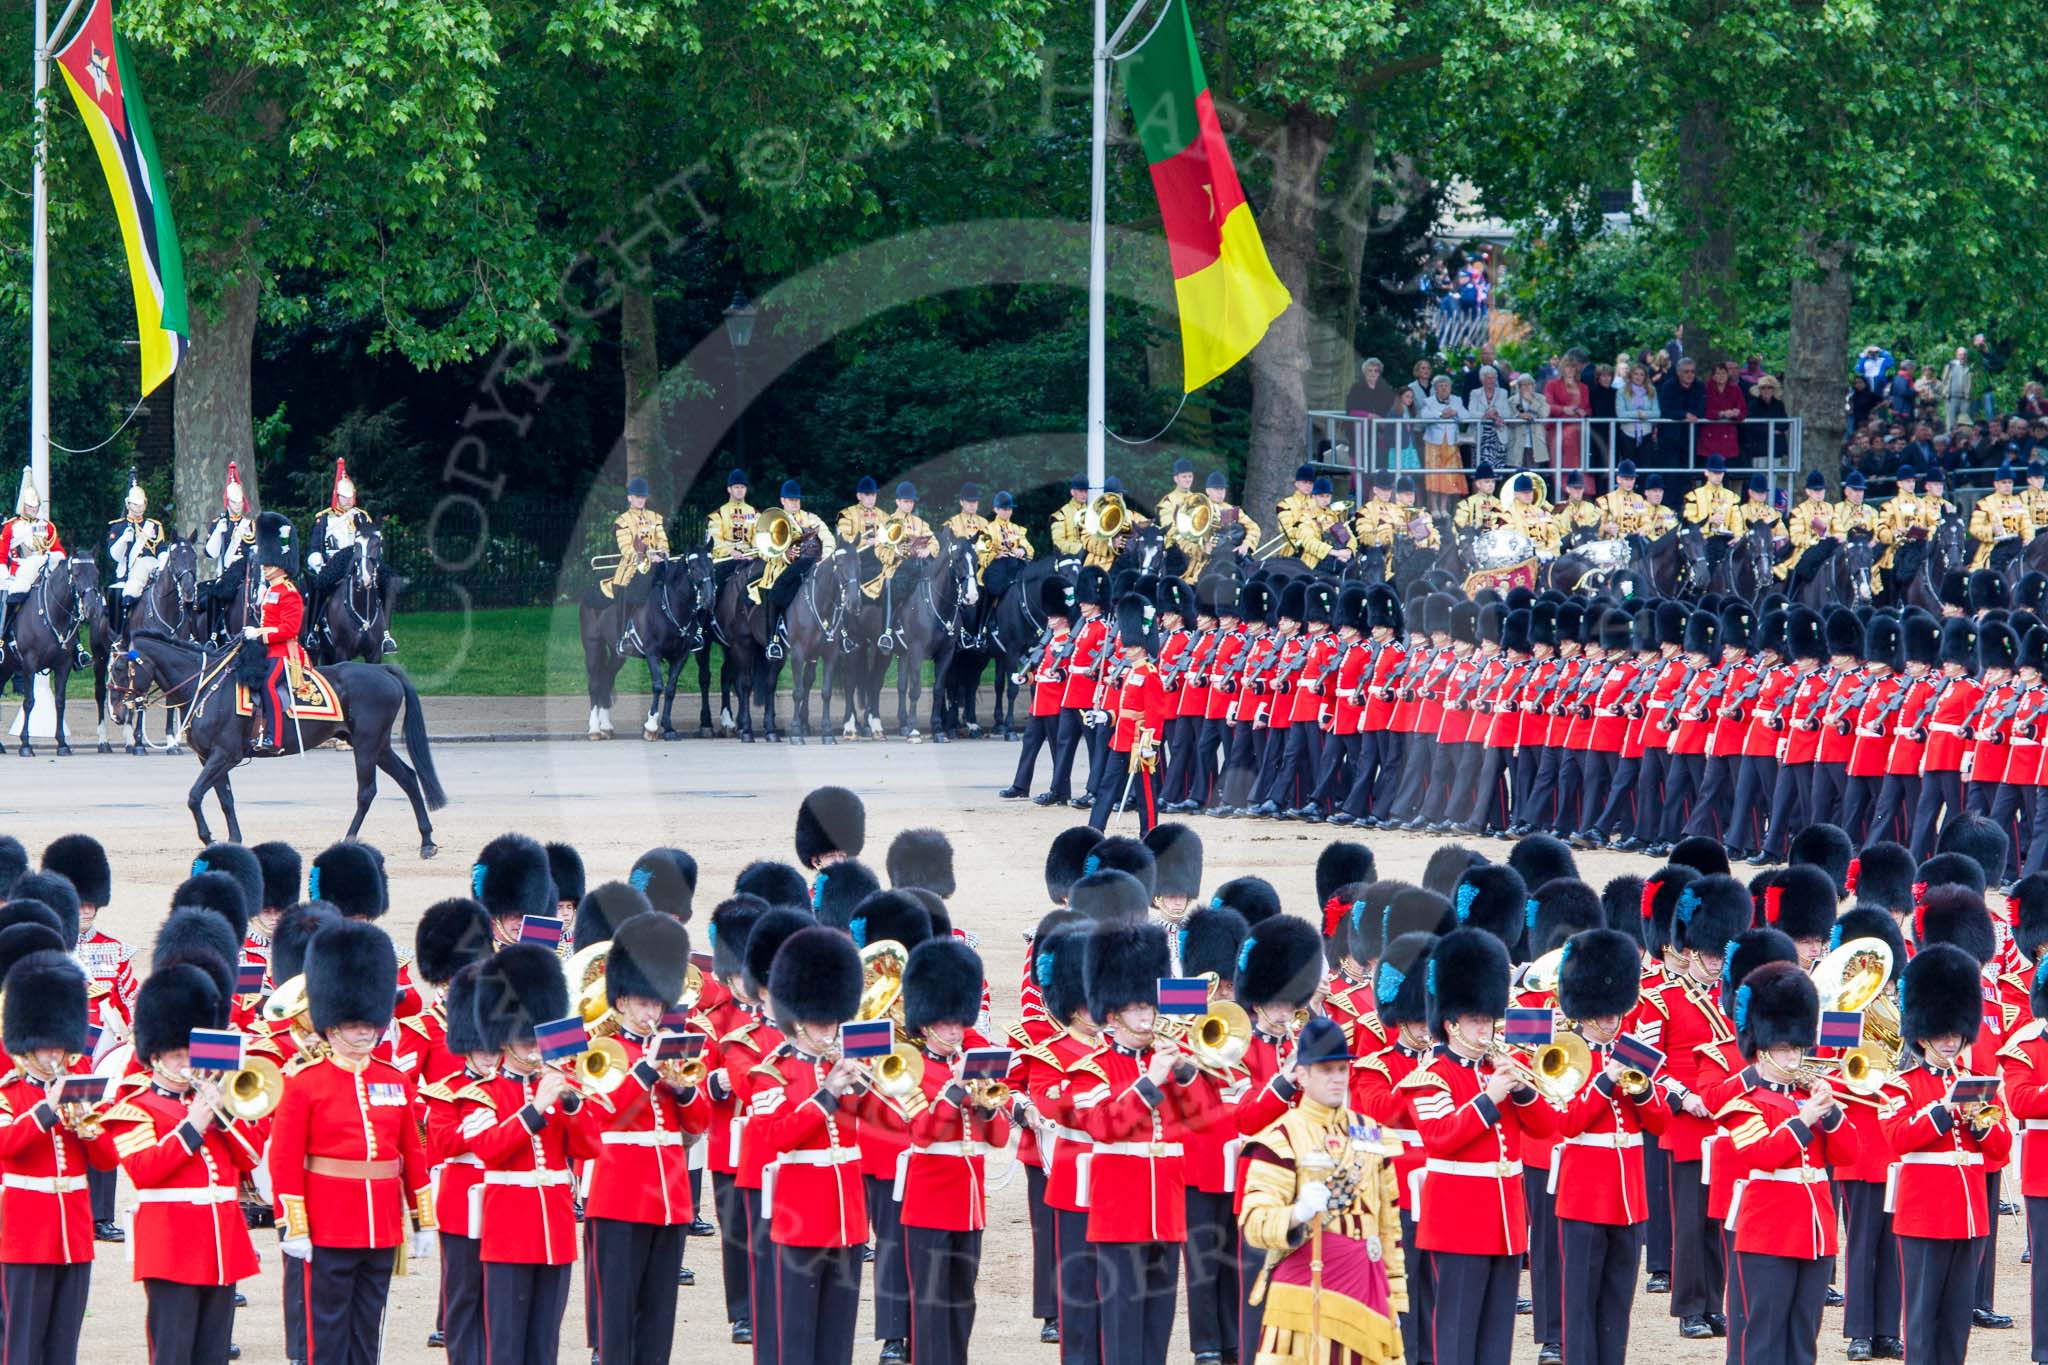 Trooping the Colour 2013: No. 1 Guard (Escort for the Colour),1st Battalion Welsh Guards, led by the Major of the Parade, at the beginning of the March Past in Quick Time. Image #575, 15 June 2013 11:42 Horse Guards Parade, London, UK